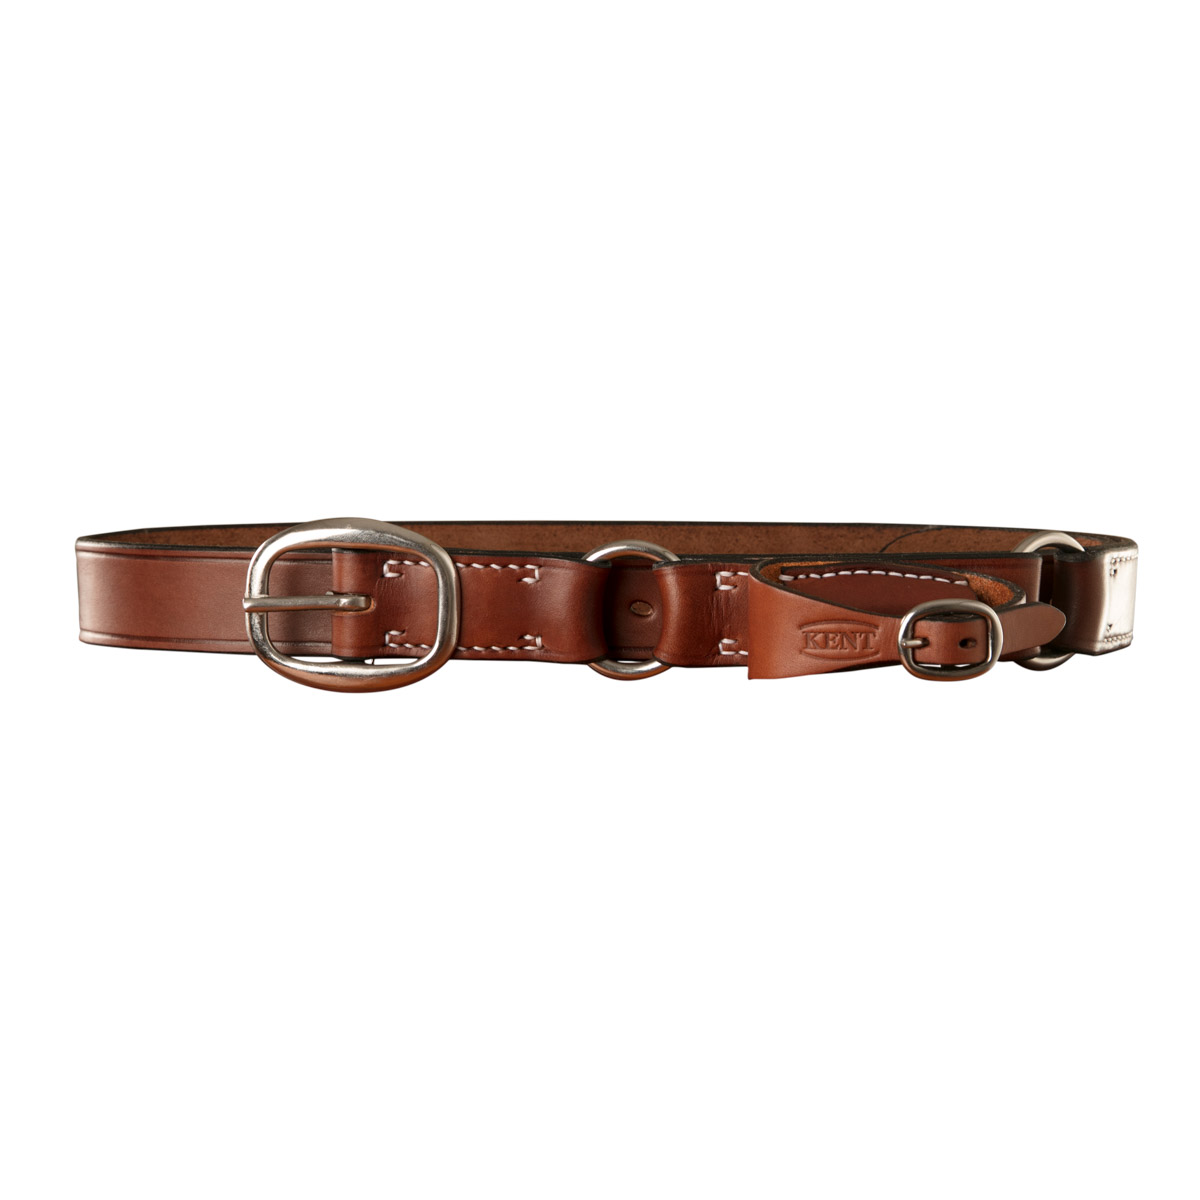 Stockmans Hobble Style Belt, Solid Leather, with Stainless Steel Swage Buckle, 2 Rings and Pouch for Pocket Knife 1